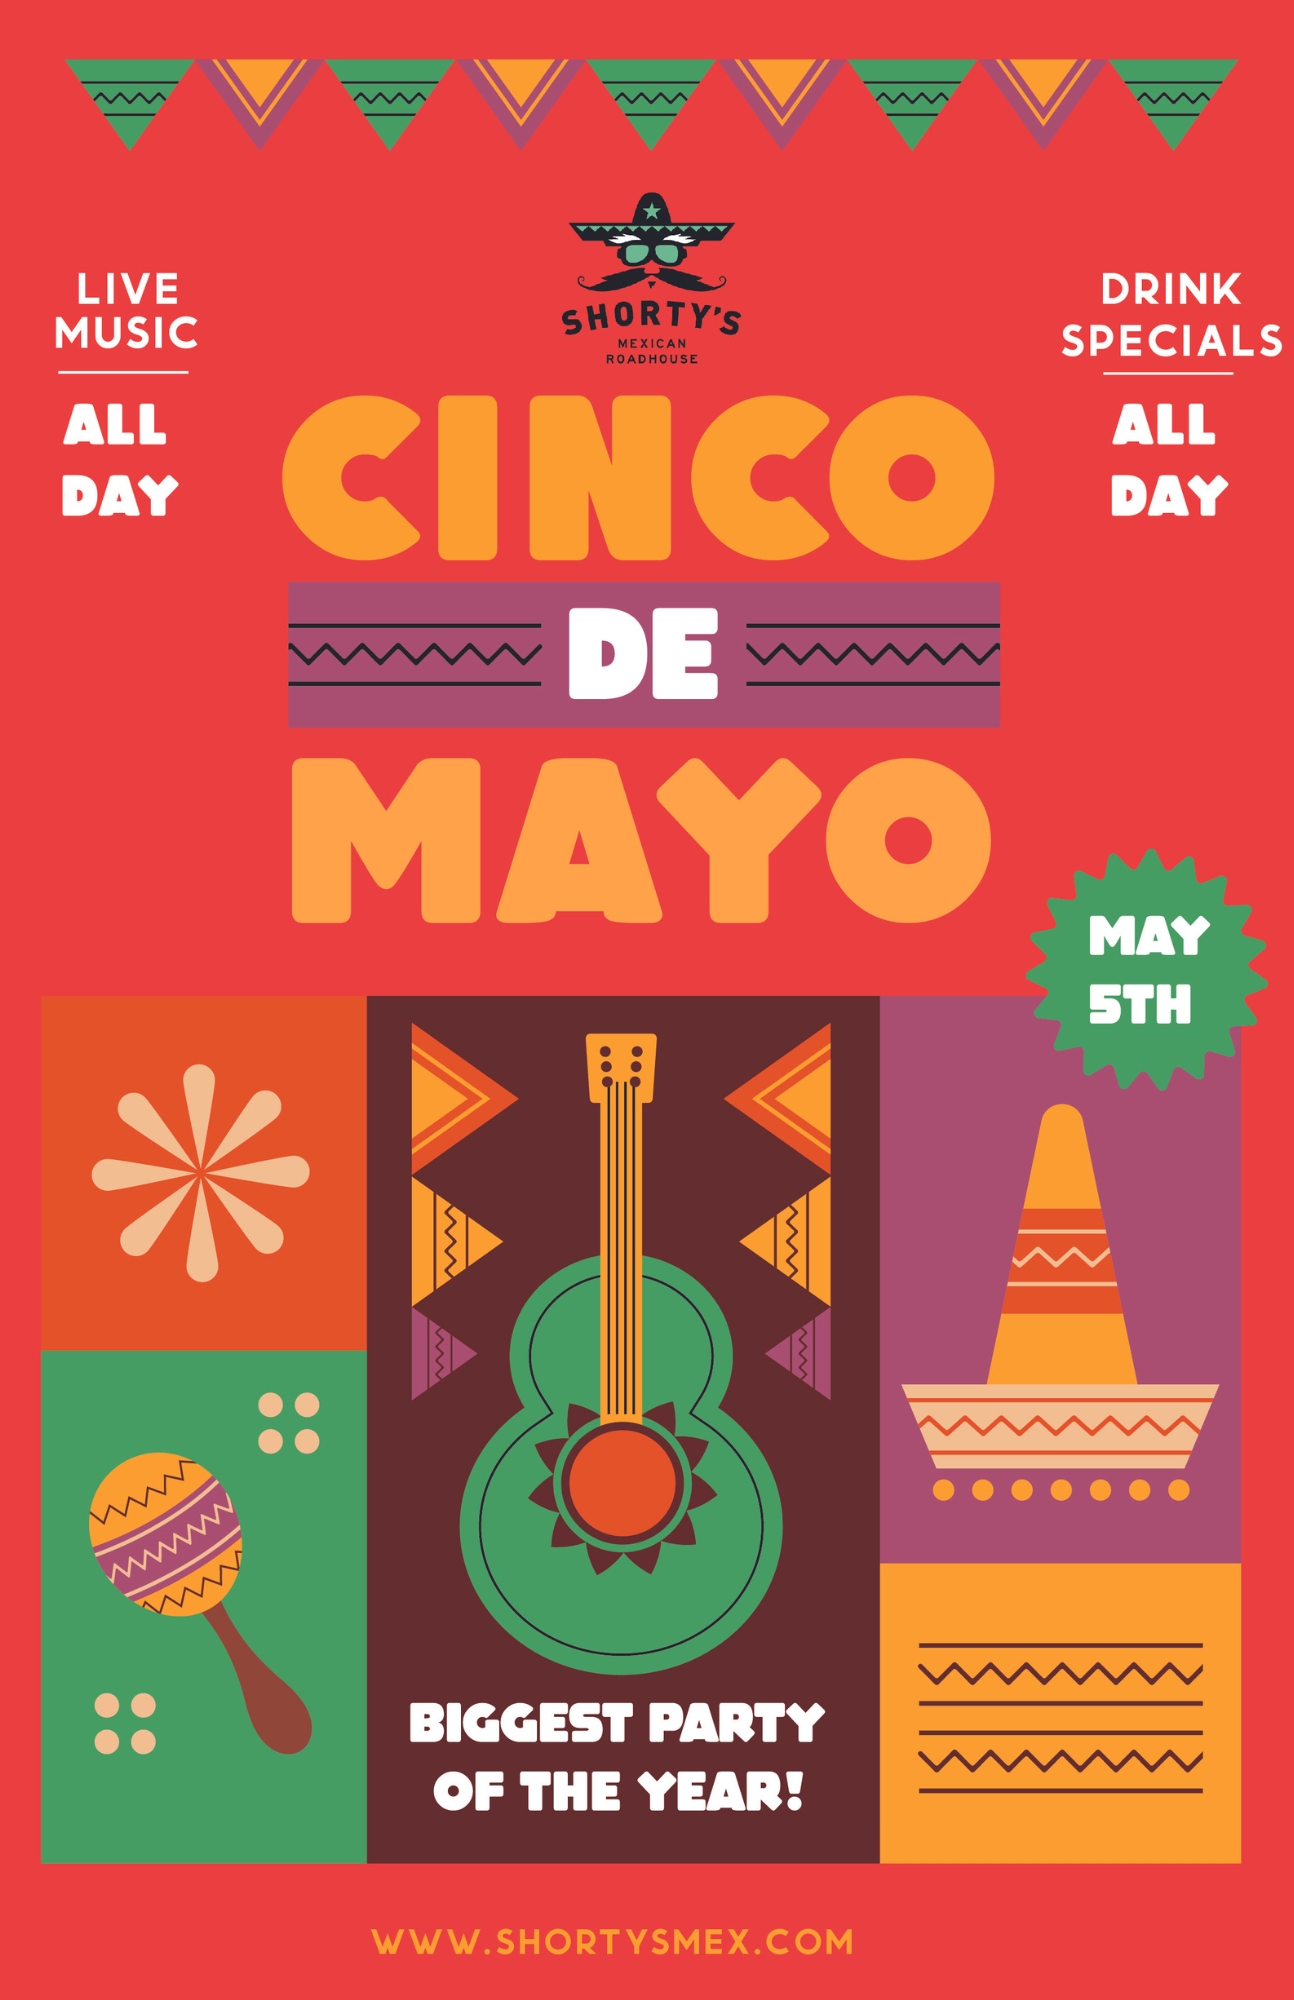 Cinco de Mayo 2024 at Shorty's - Live Music and Drink Specials All Day